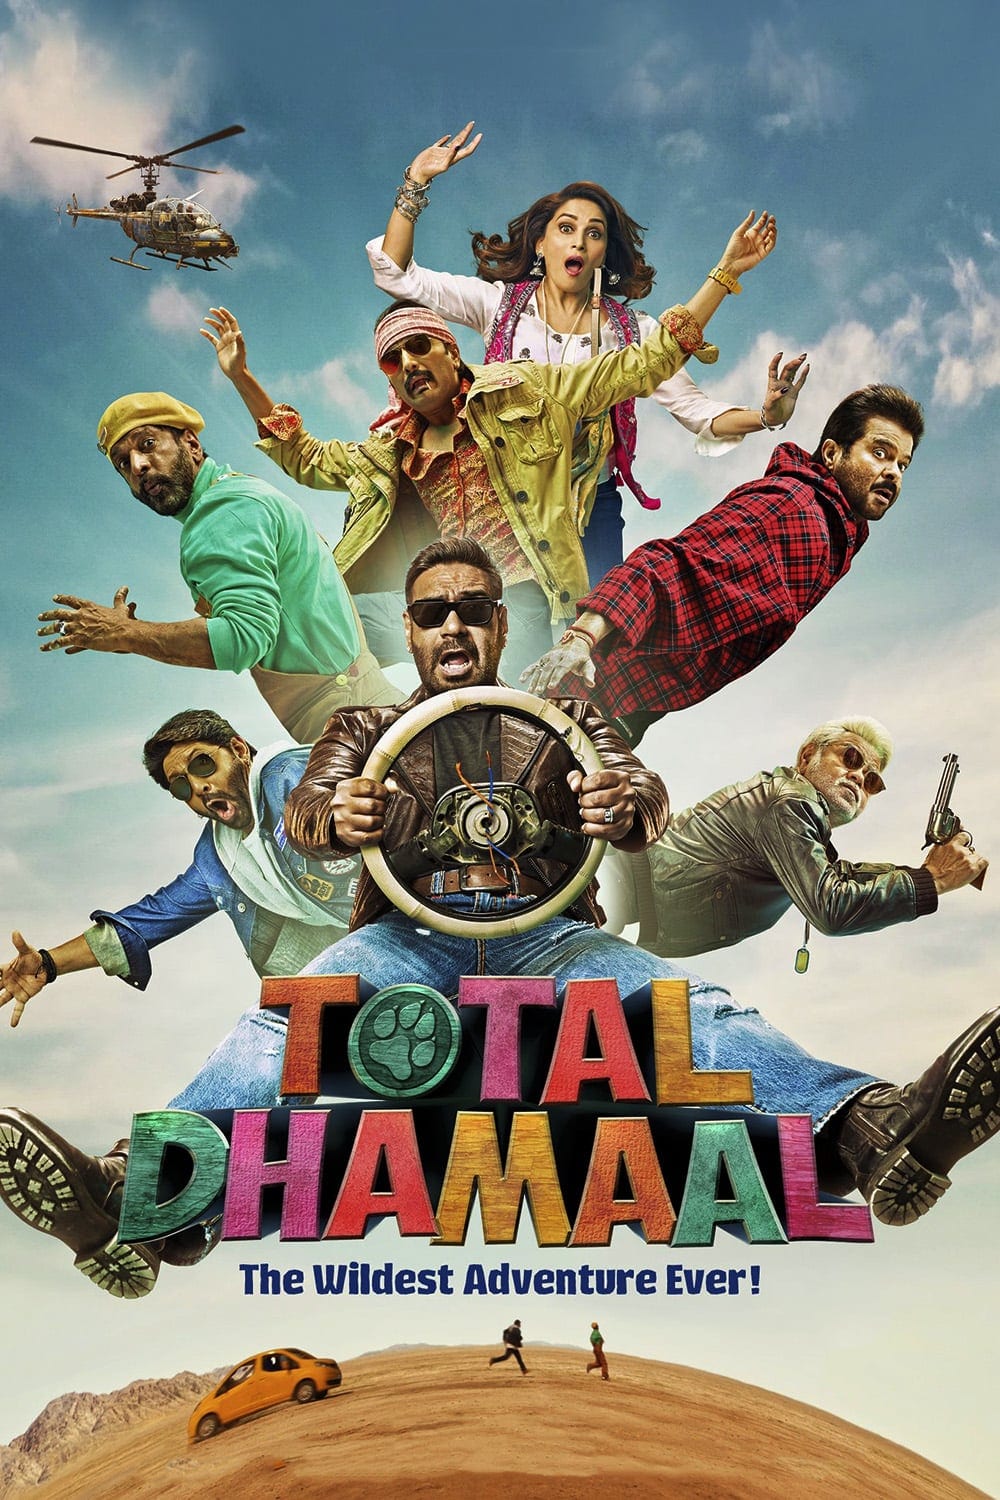 Poster for the movie "Total Dhamaal"